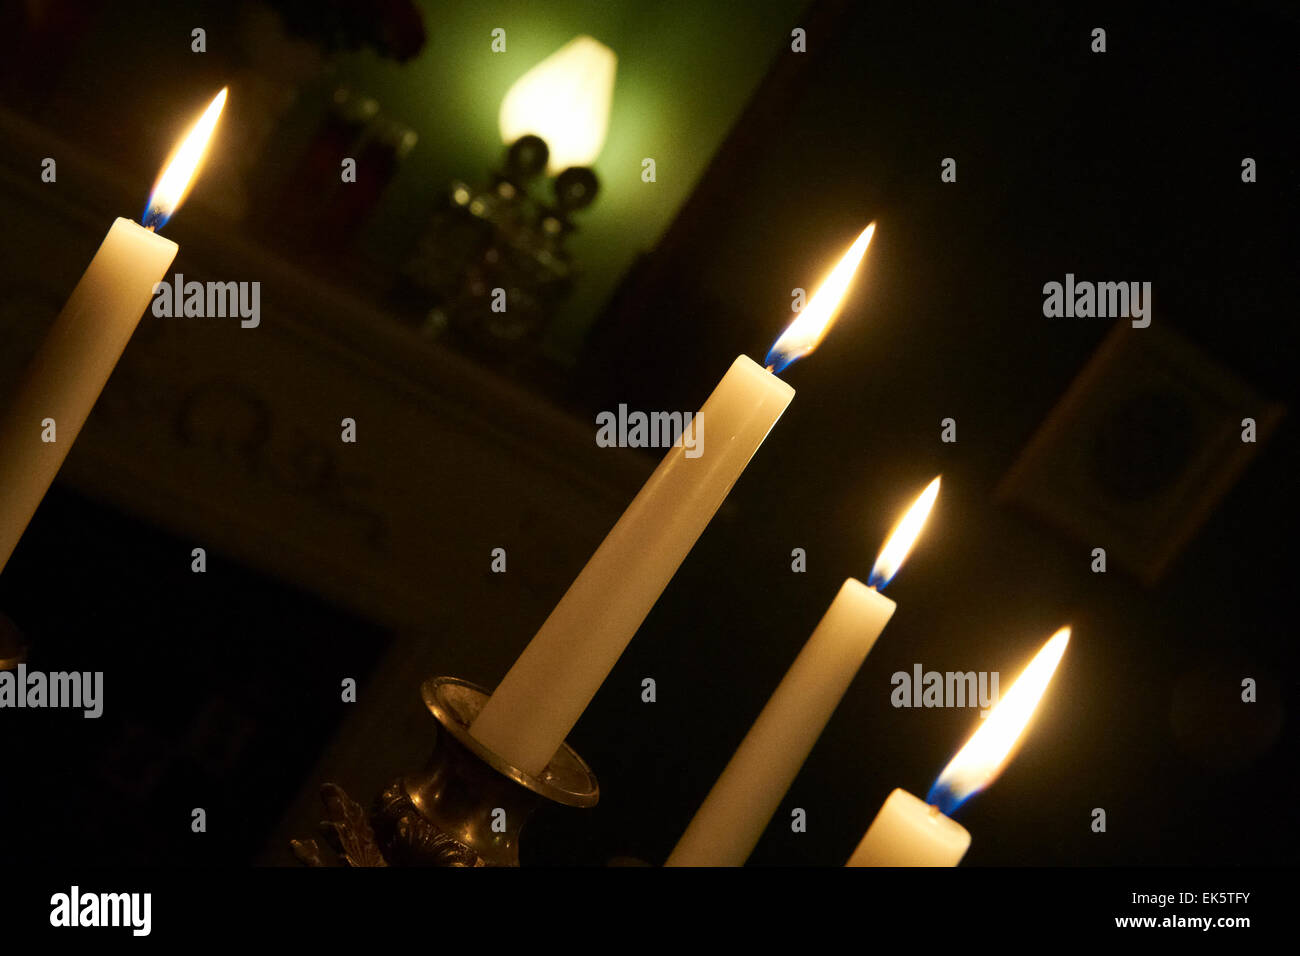 Moody candele accese Foto Stock